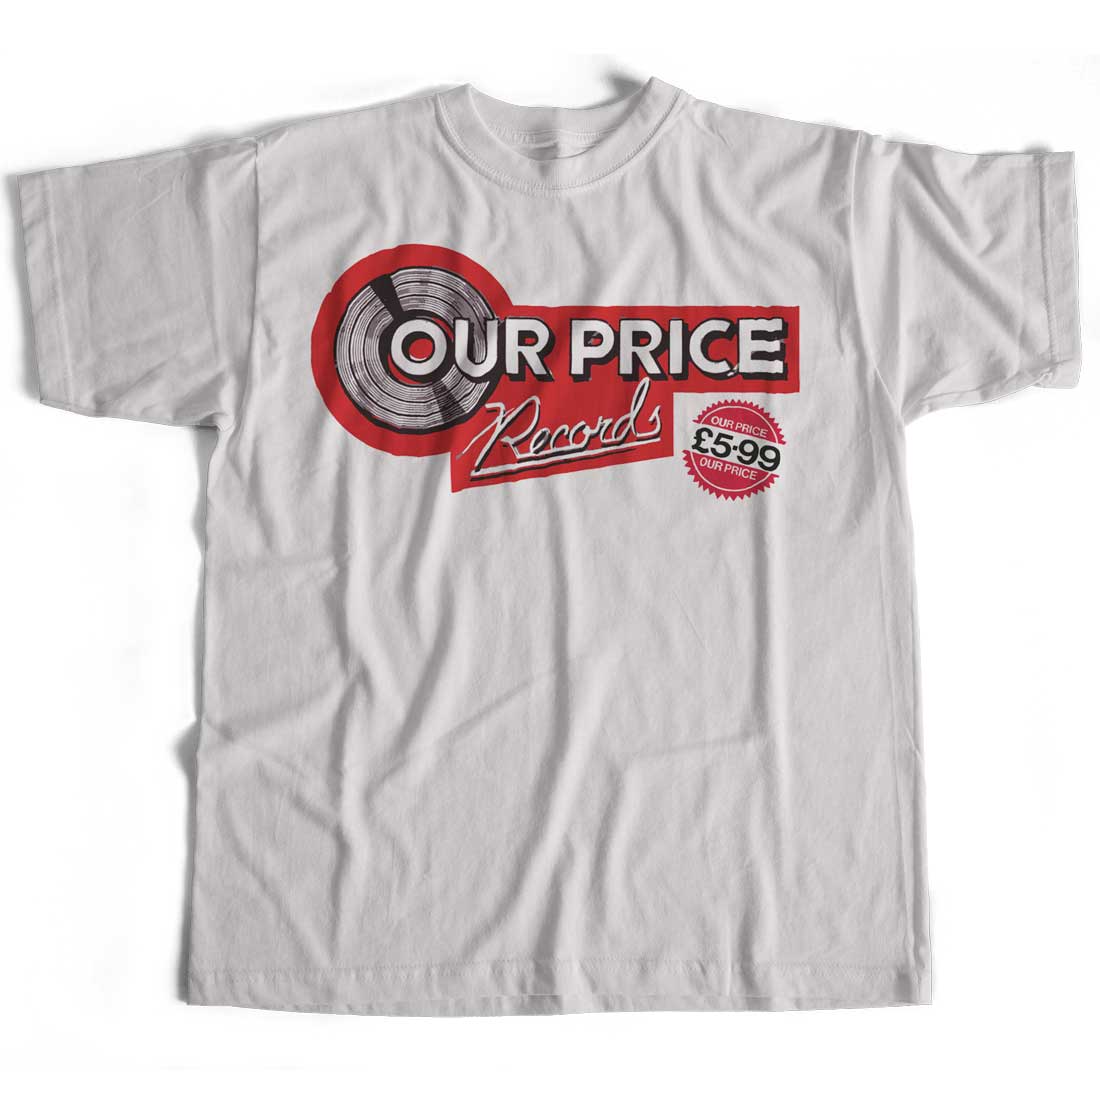 Our Price Records Logo T Shirt - An Old Skool Hooligans Retro Music Classic